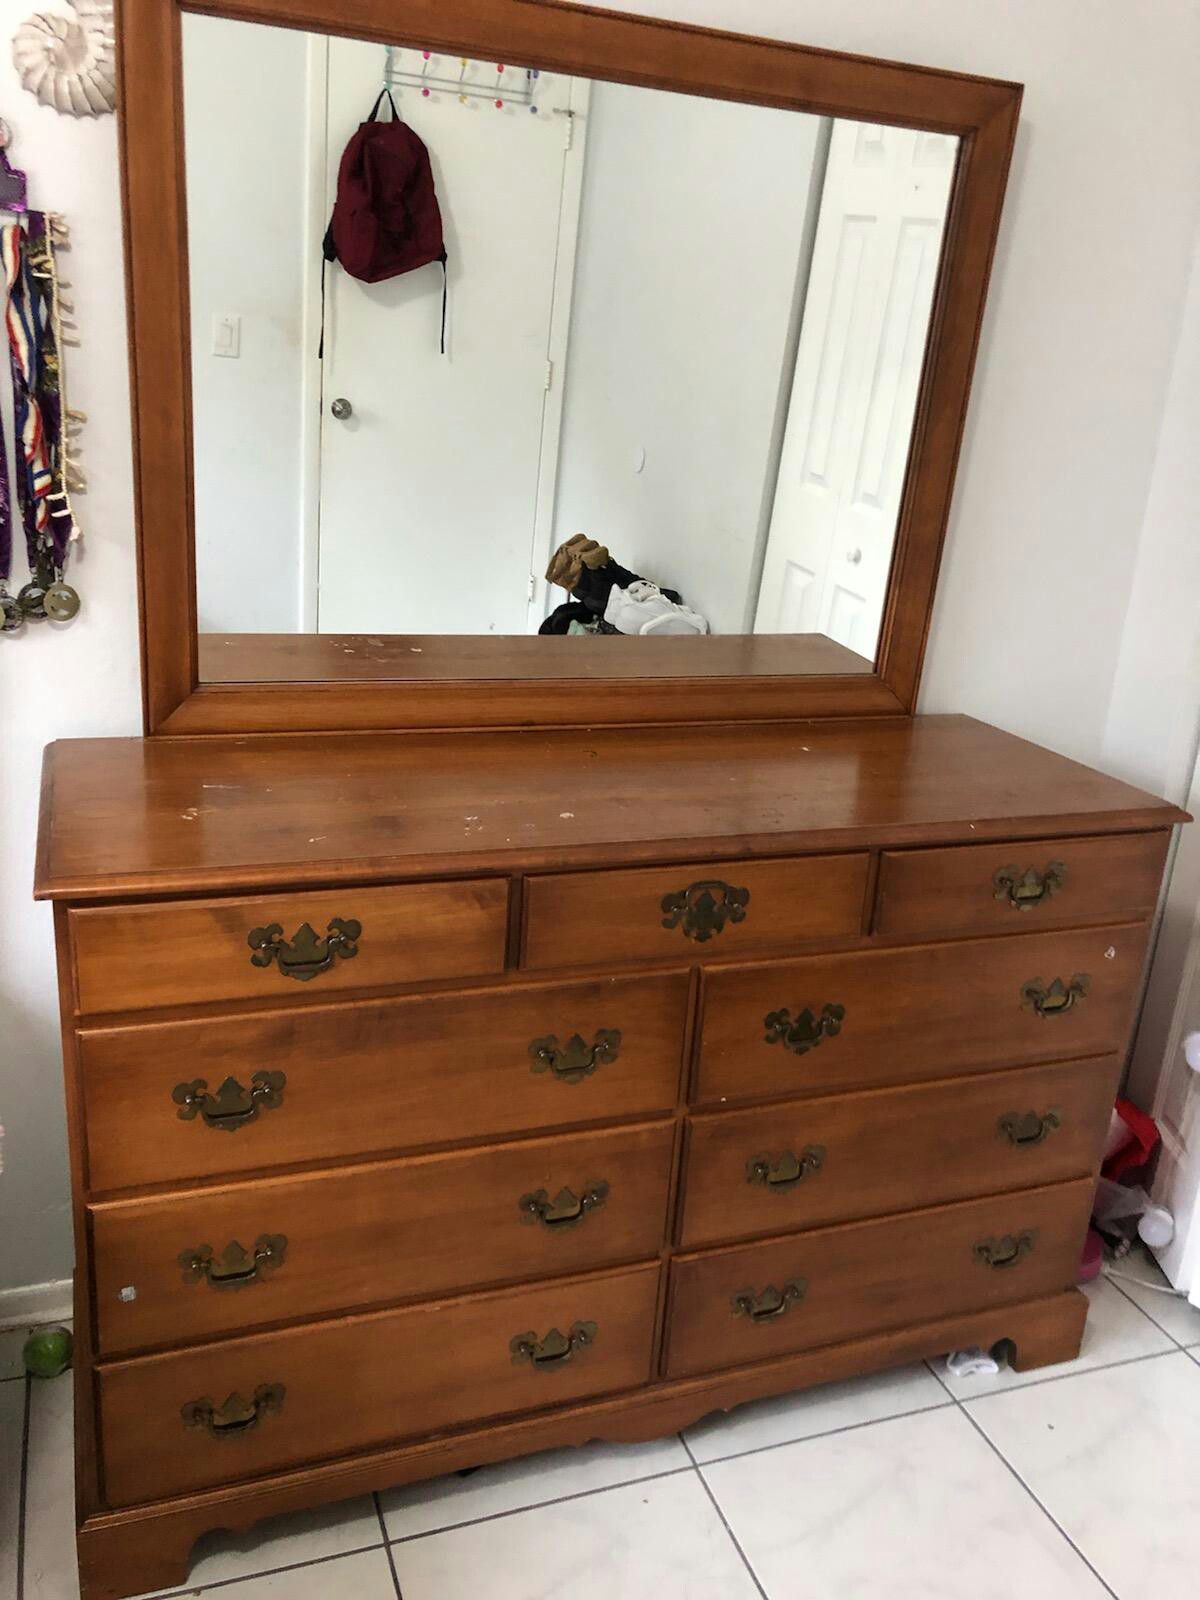 Used dresser with mirror for sale!!!